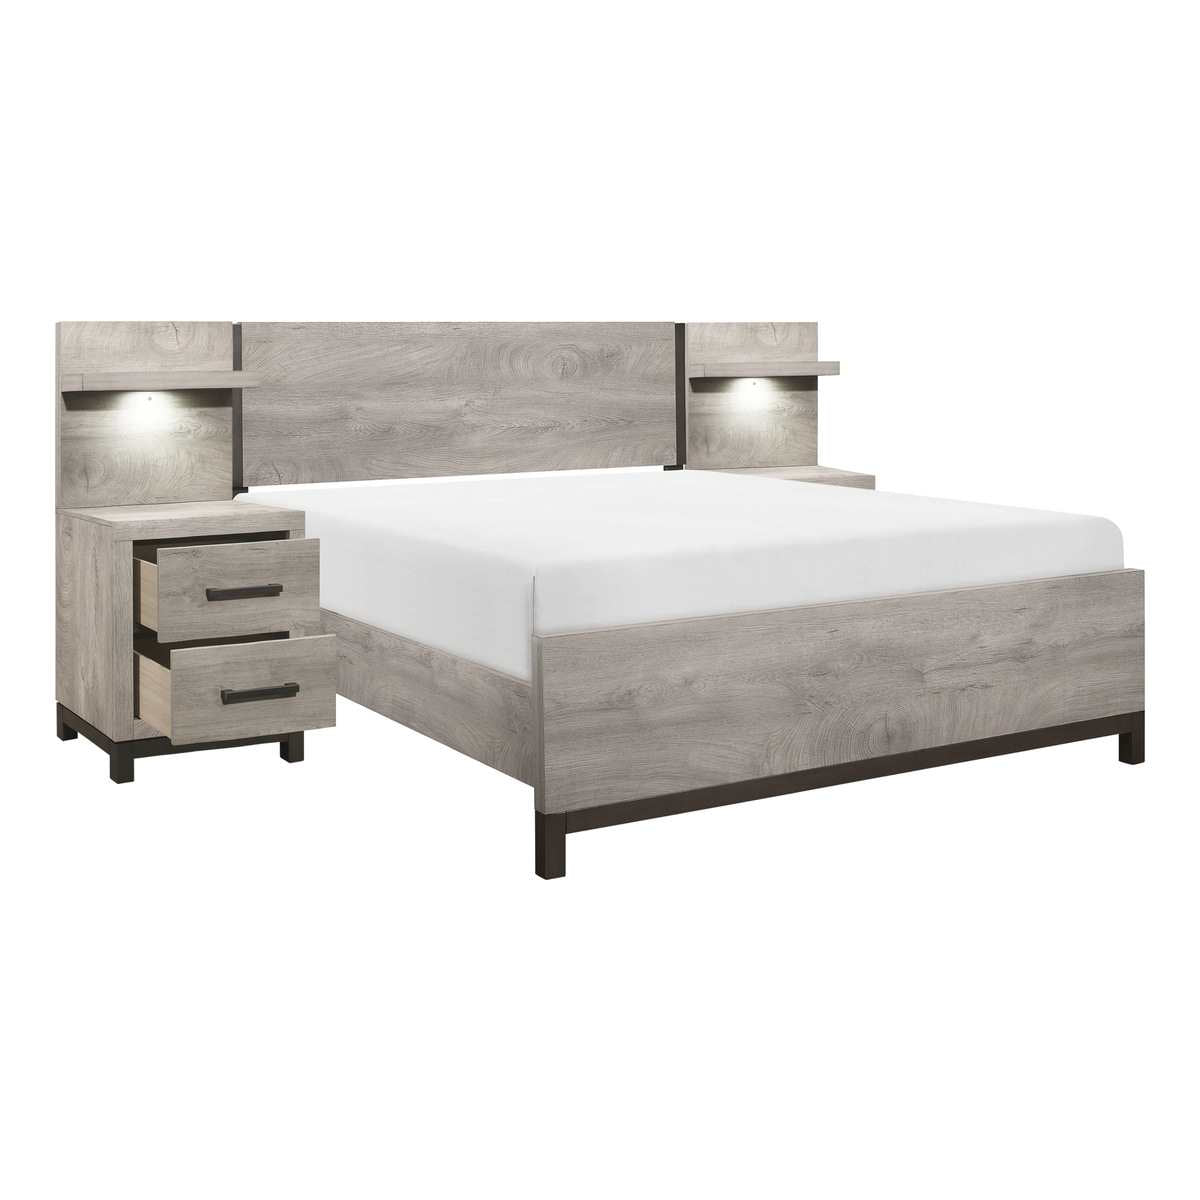 Zephyr Wall Bedroom Collection 1577